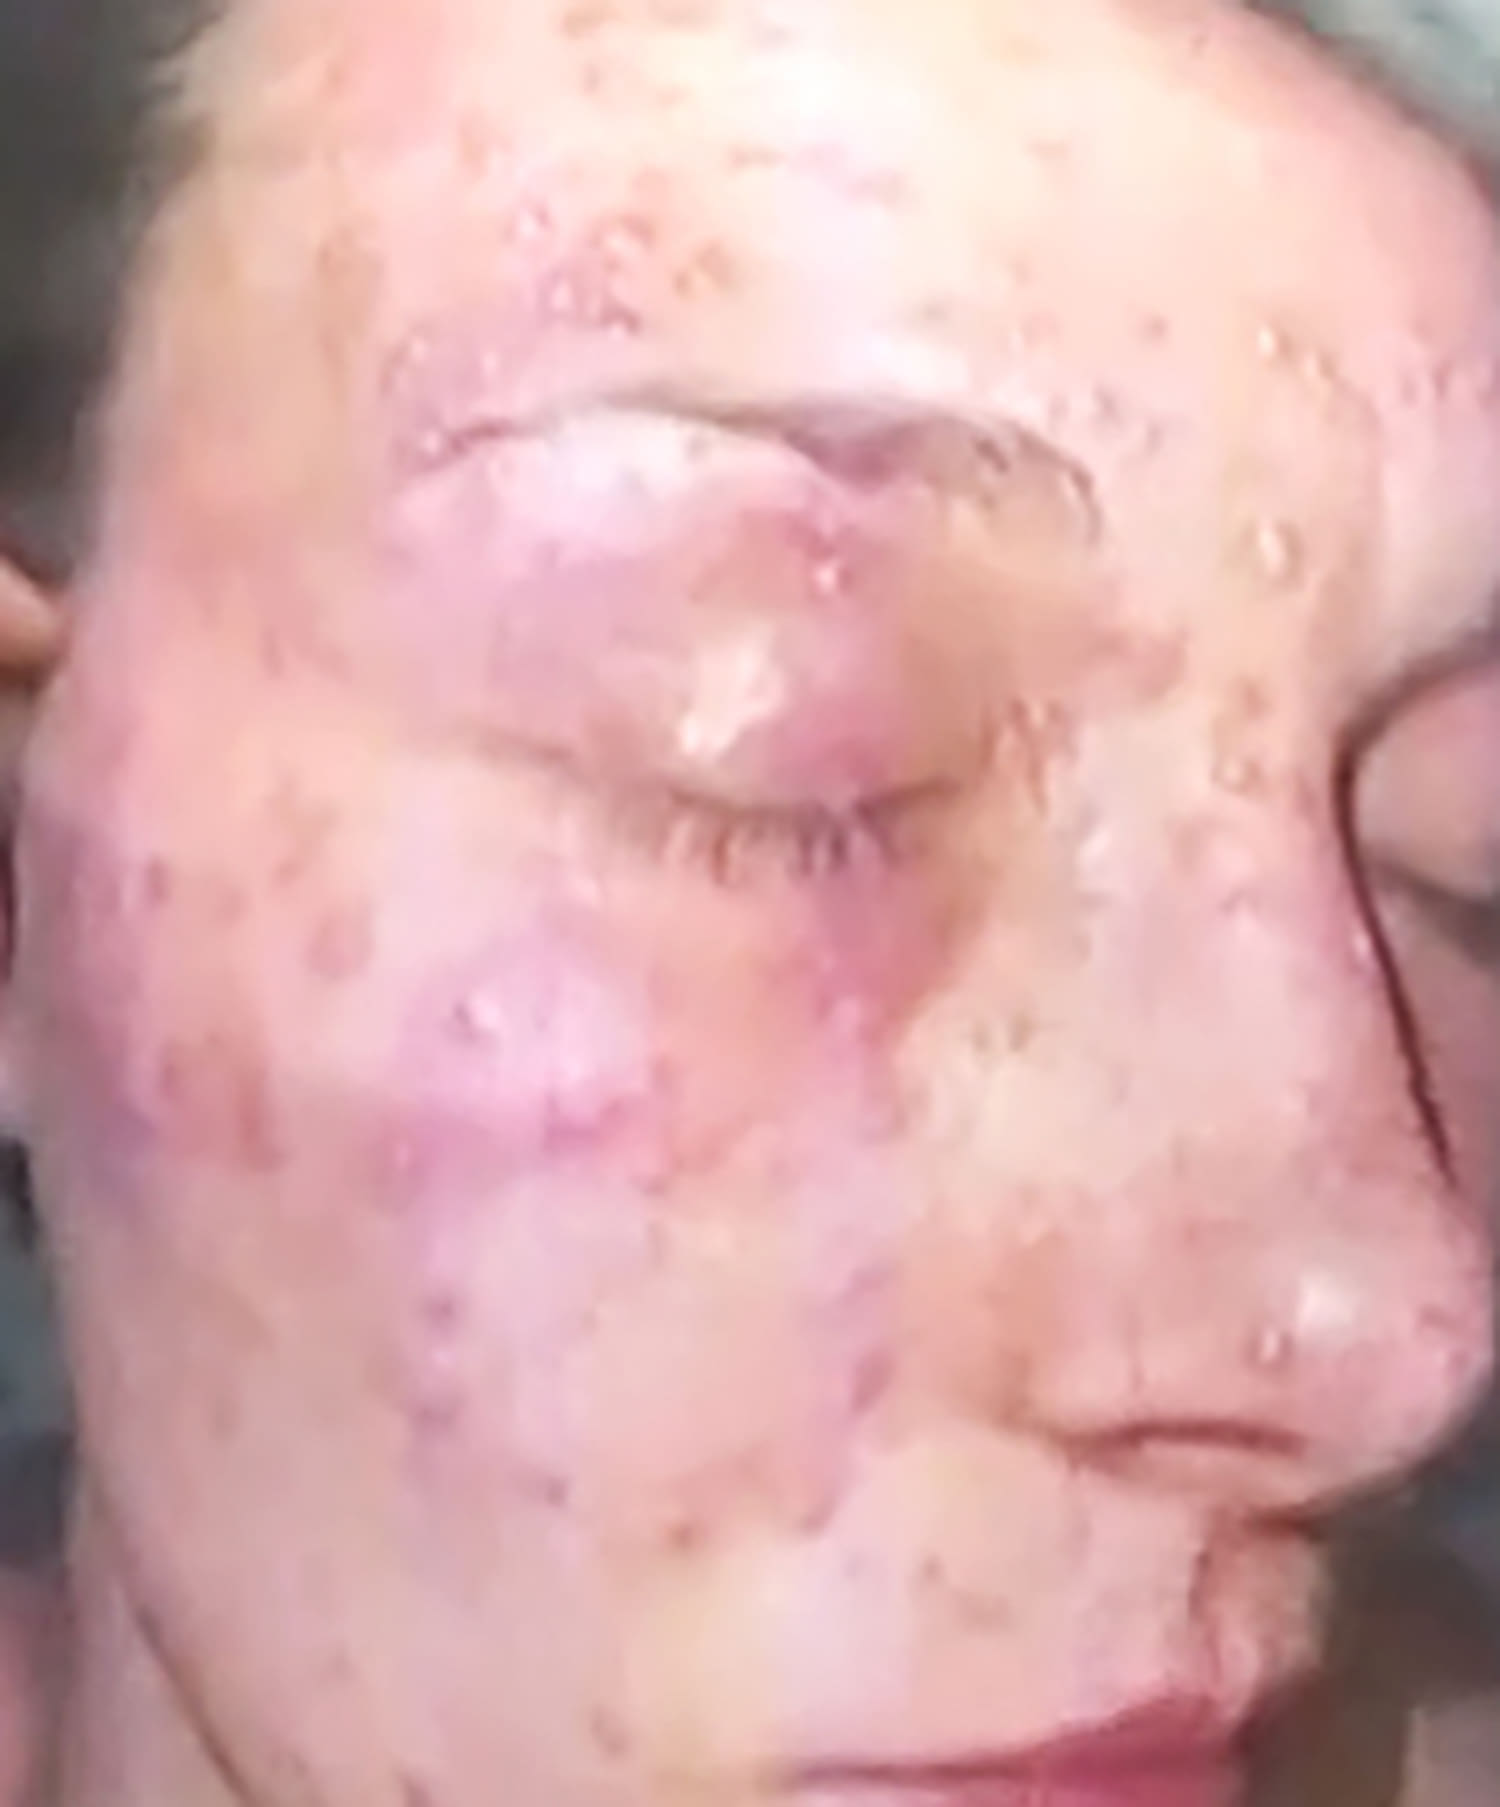 Texas mom says police held her face in pile of fire ants, covering head and neck with hundreds of bite marks